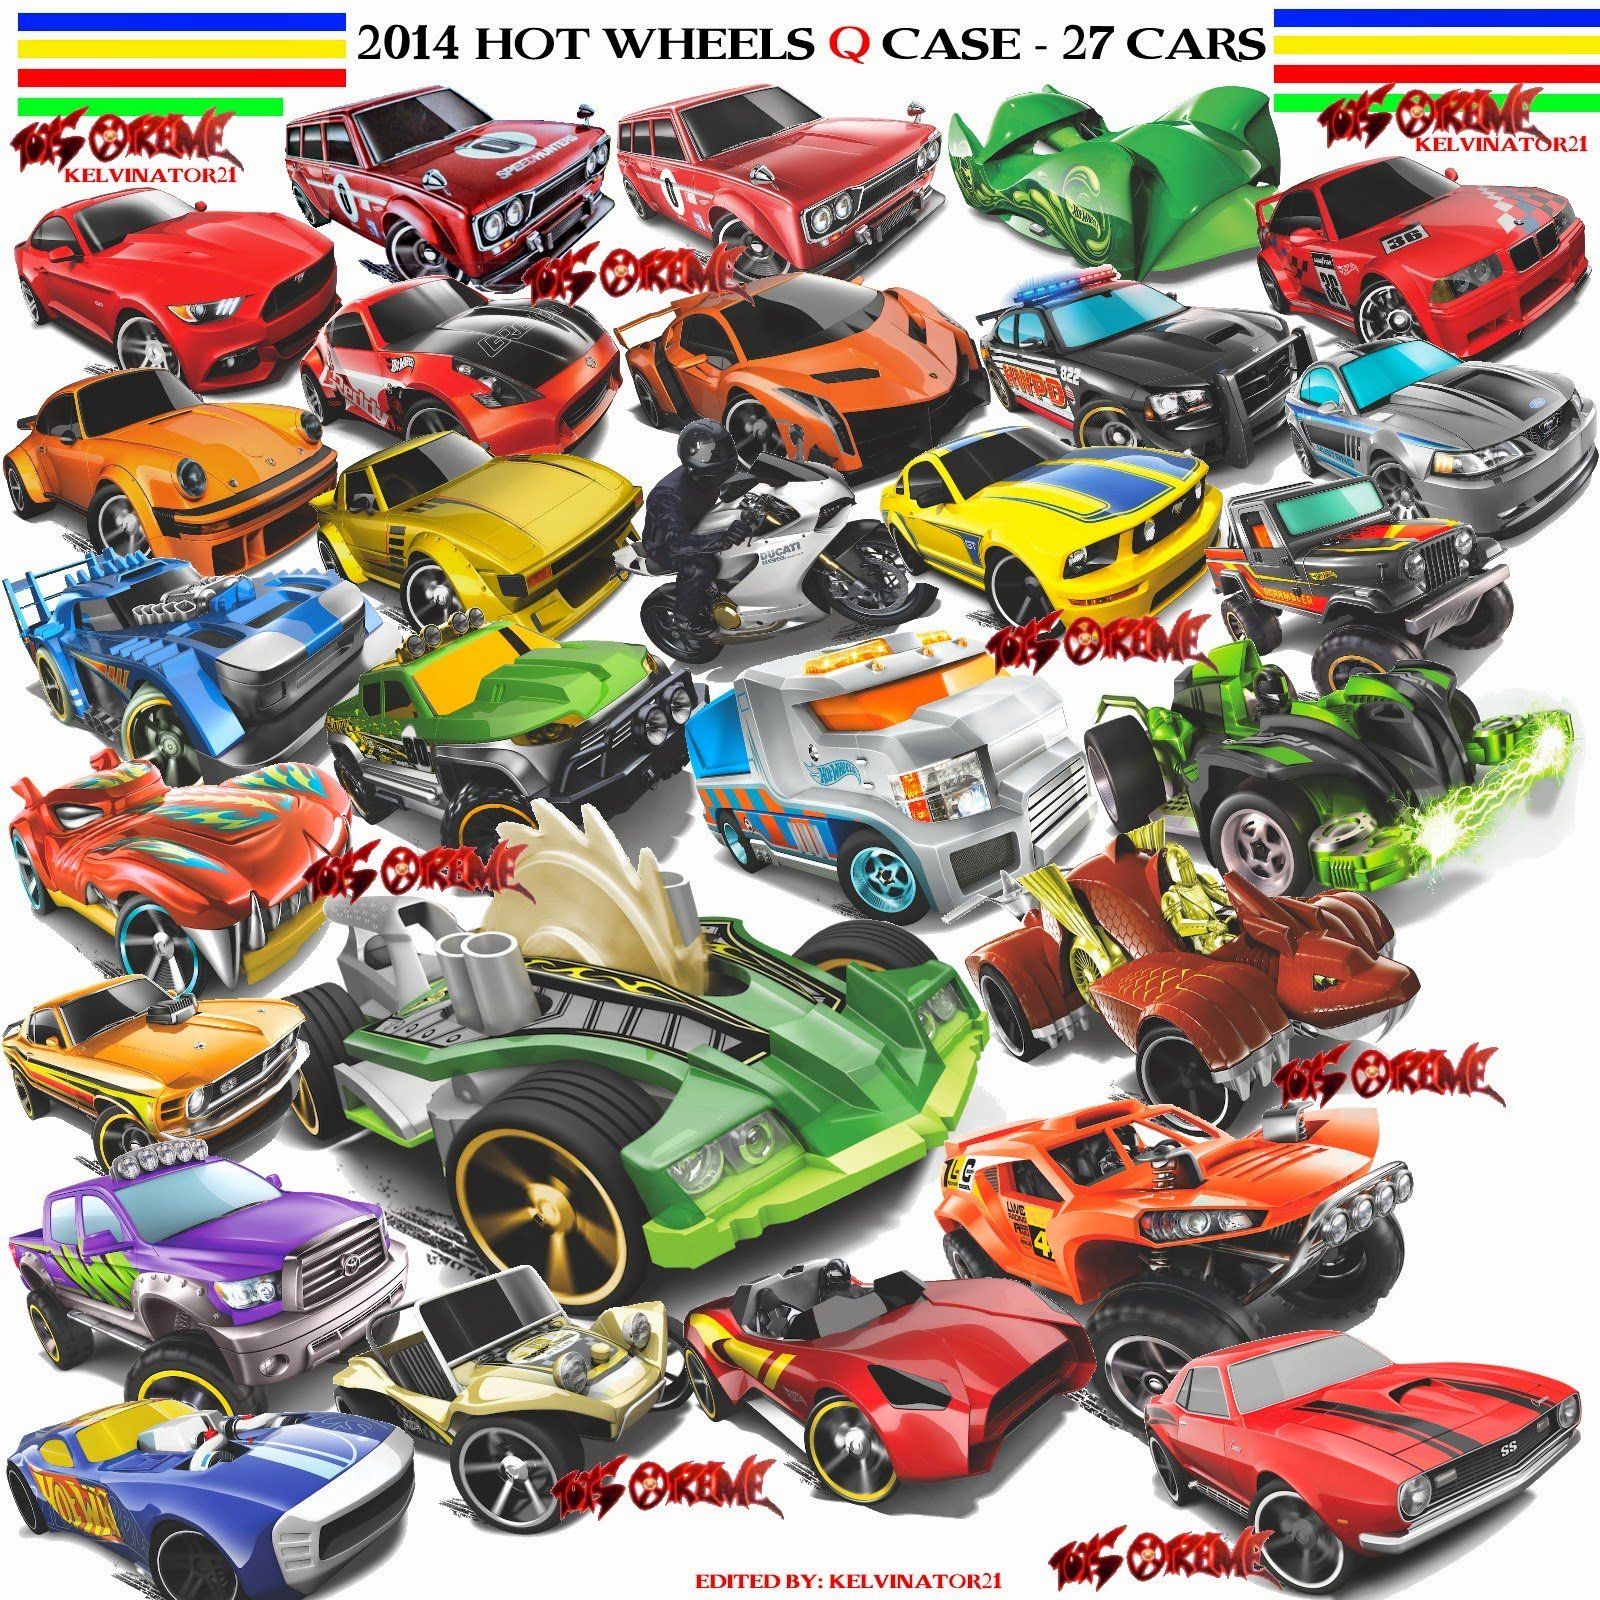 HOT-WHEELS rod rods toy toys race racing hot wheels wallpaper ...